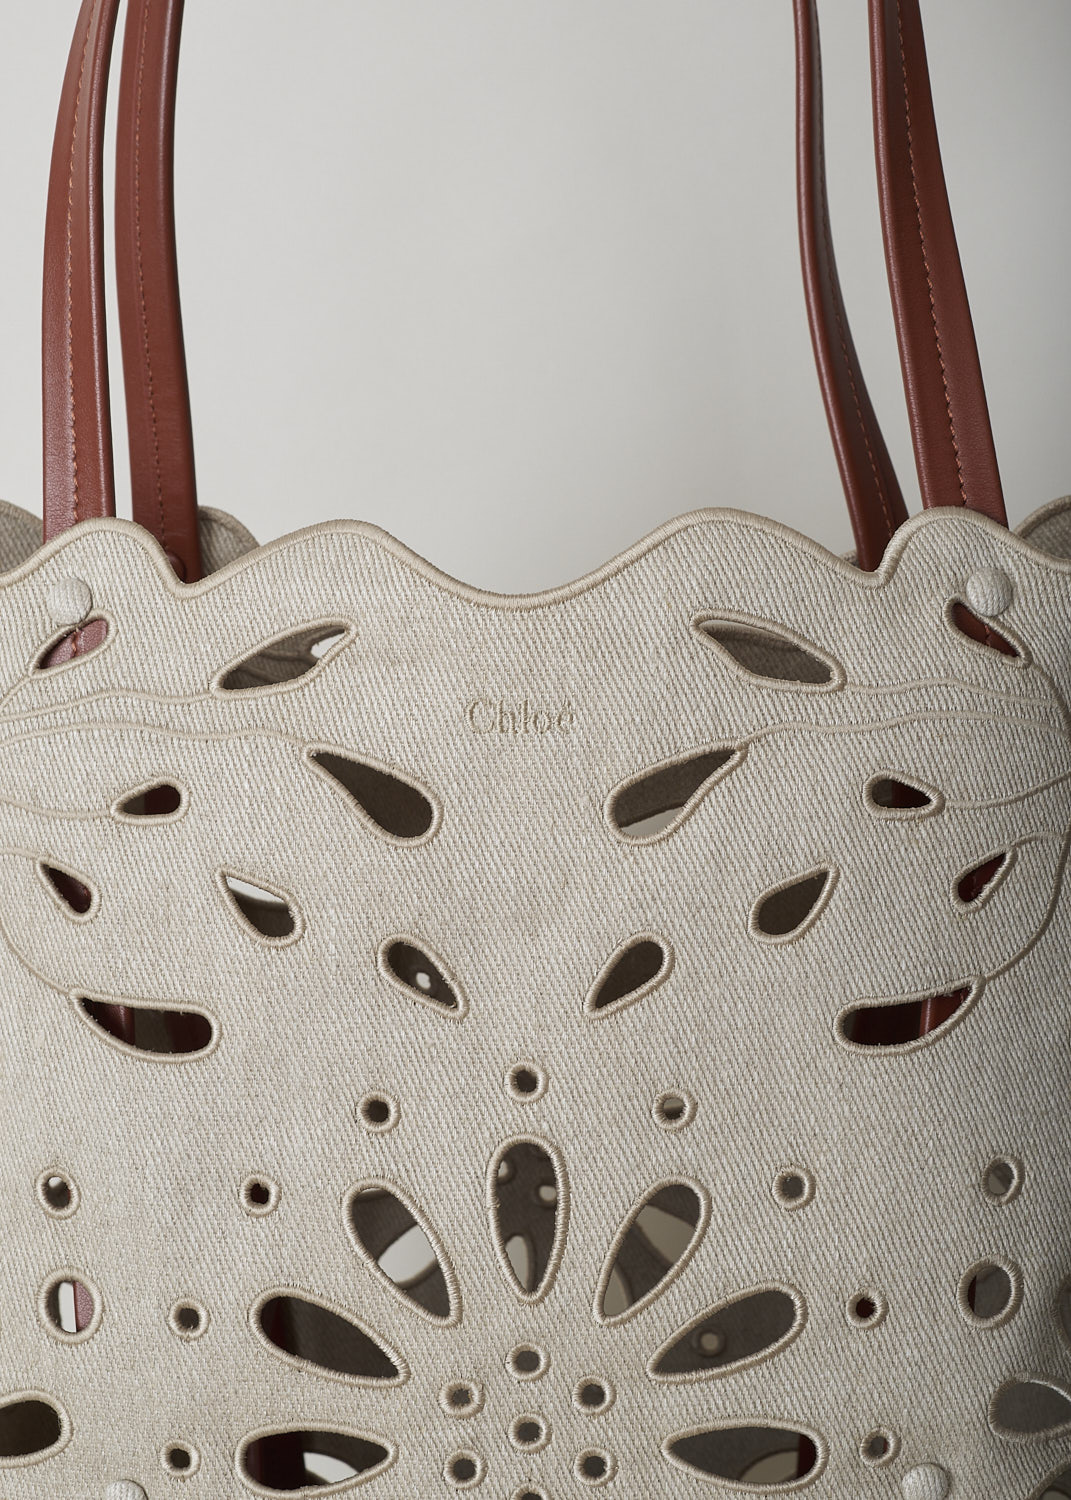 CHLOÉ LARGE KAMILLA NORTH - SOUTH TOTE BAG IN SEPIA BROWN
,CHC22SS492G2327S_KAMILLA_LARGE_NORTH_SO, Beige, Detail, This large Kamilla North - South tote bag in sepia brown has two tan leather top handles. The linen has a scalloped top edge and floral broderie anglaise detailing throughout. On the inside, the bag has a removable tan leather pouch with a zipper.  